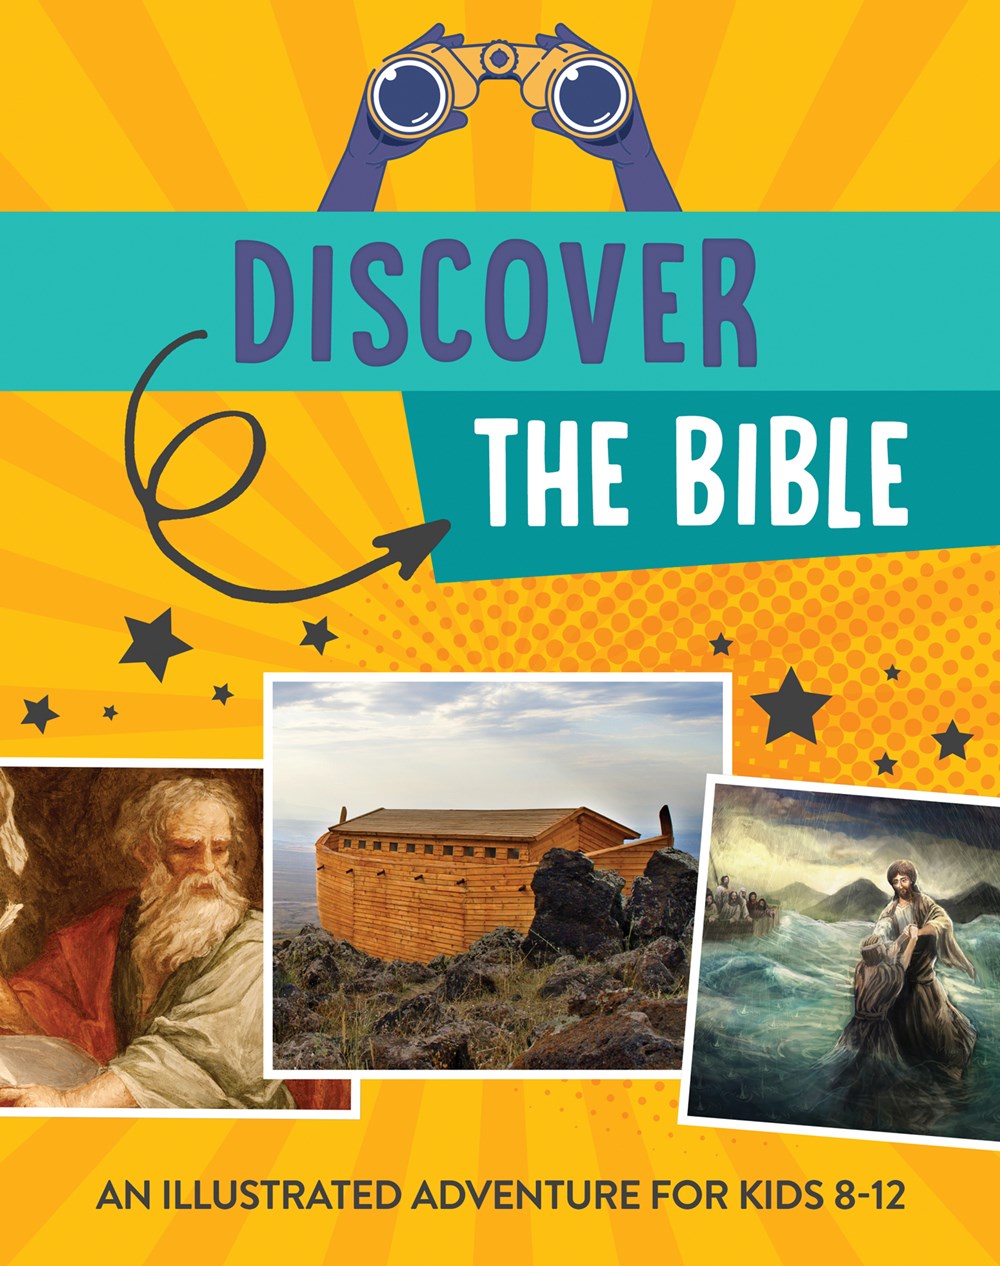 Discover the Bible | The Christian Gift Company